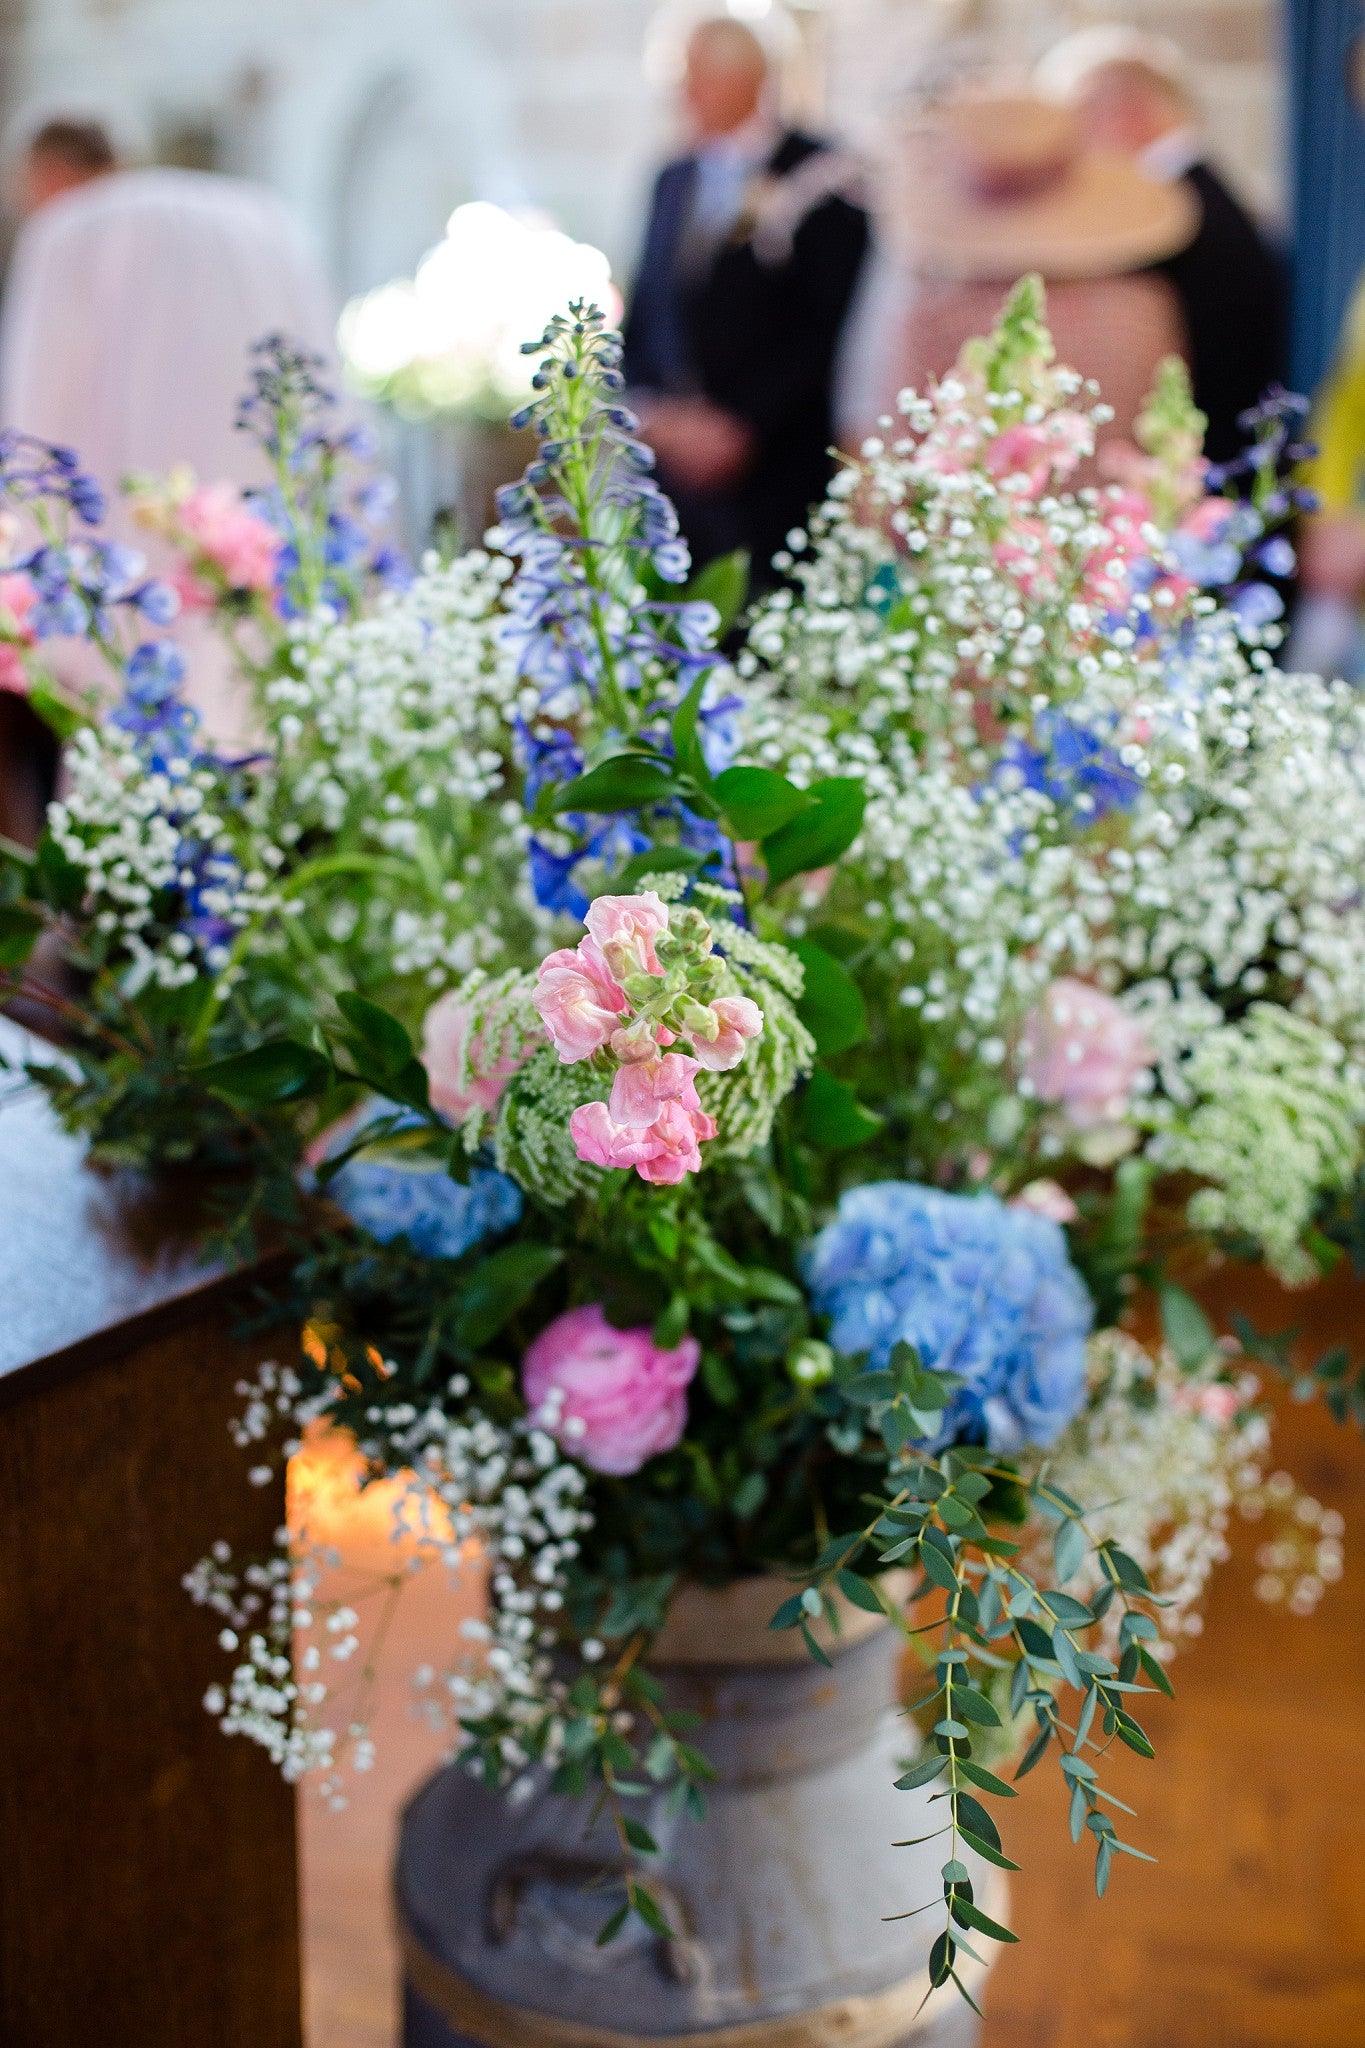 Church floral wedding decorations in shades of pink and blue.